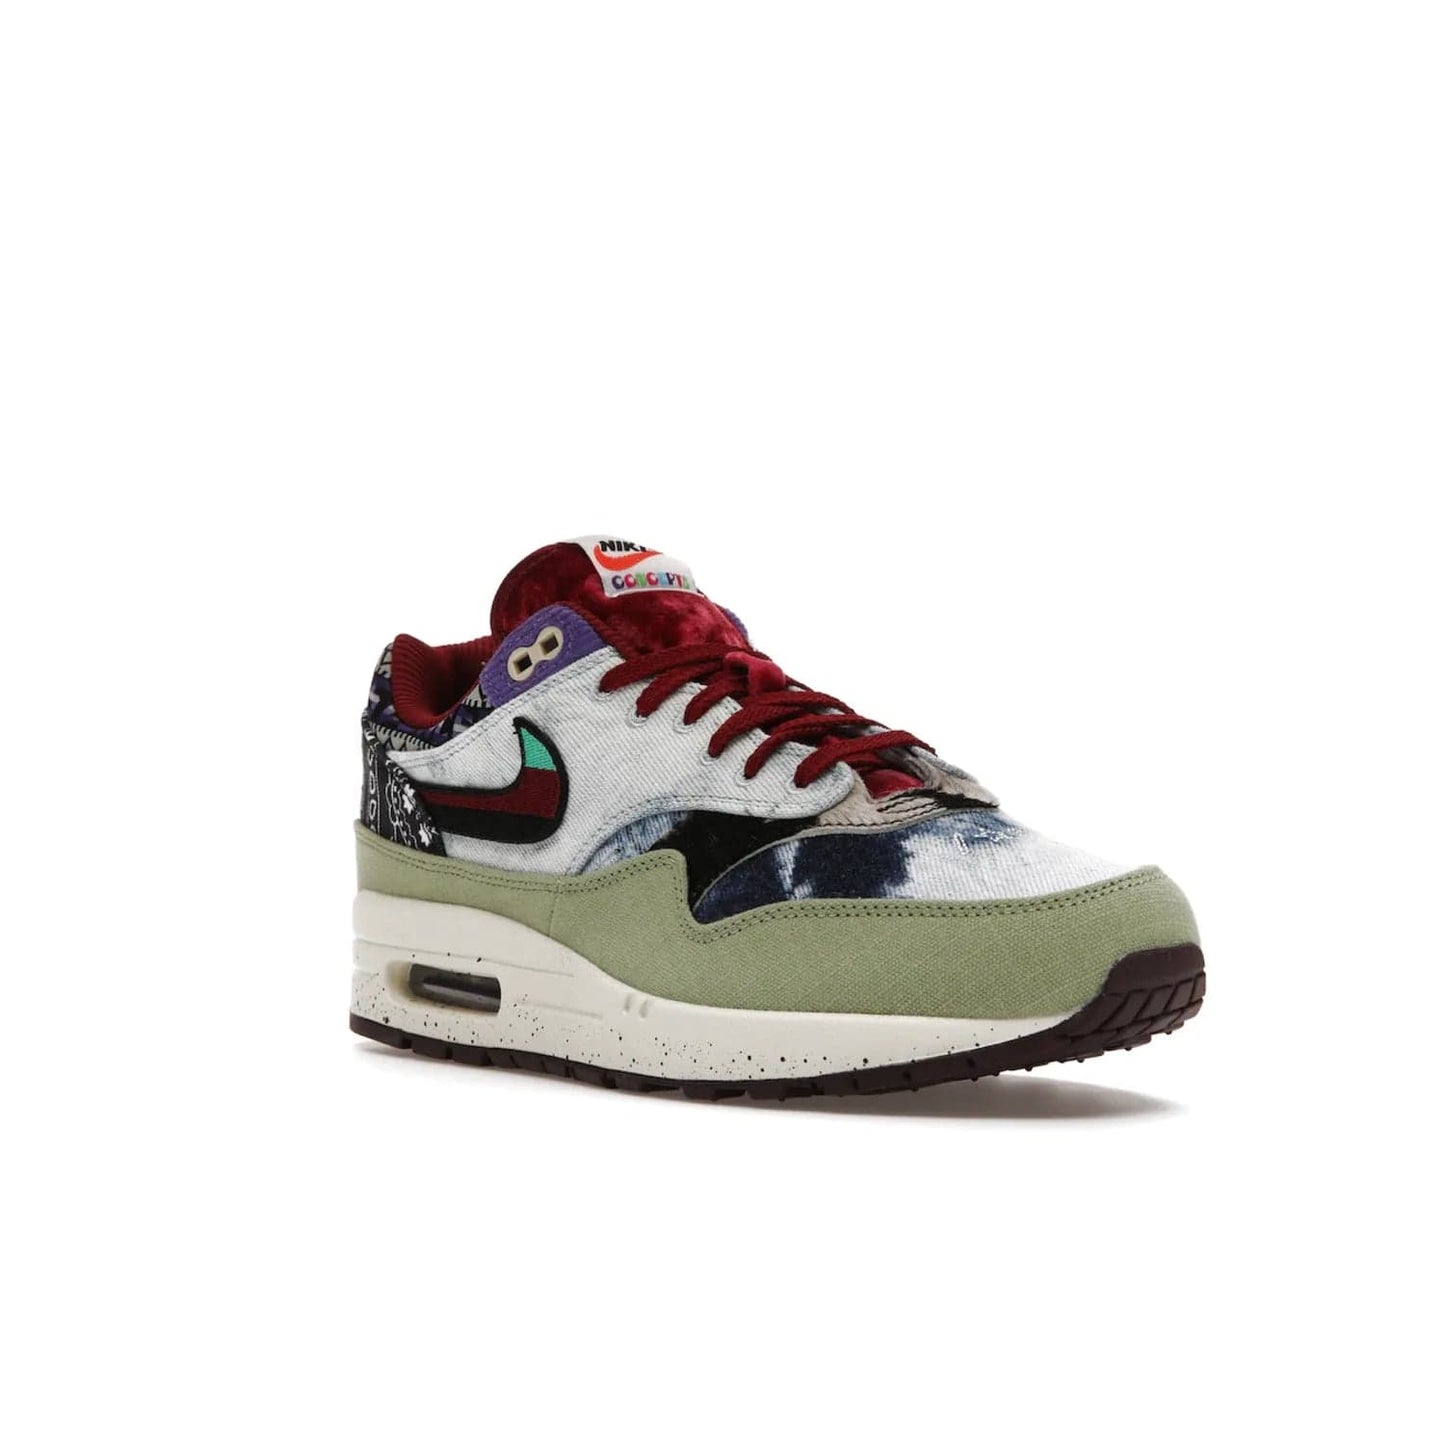 Nike Air Max 1 SP Concepts Mellow - Image 6 - Only at www.BallersClubKickz.com - The Nike Air Max 1 SP Concepts Mellow combines classic and modern style with unique materials, embroidery, and a speckled sole. Get heads turning with this stylish sneaker, releasing March 2022.